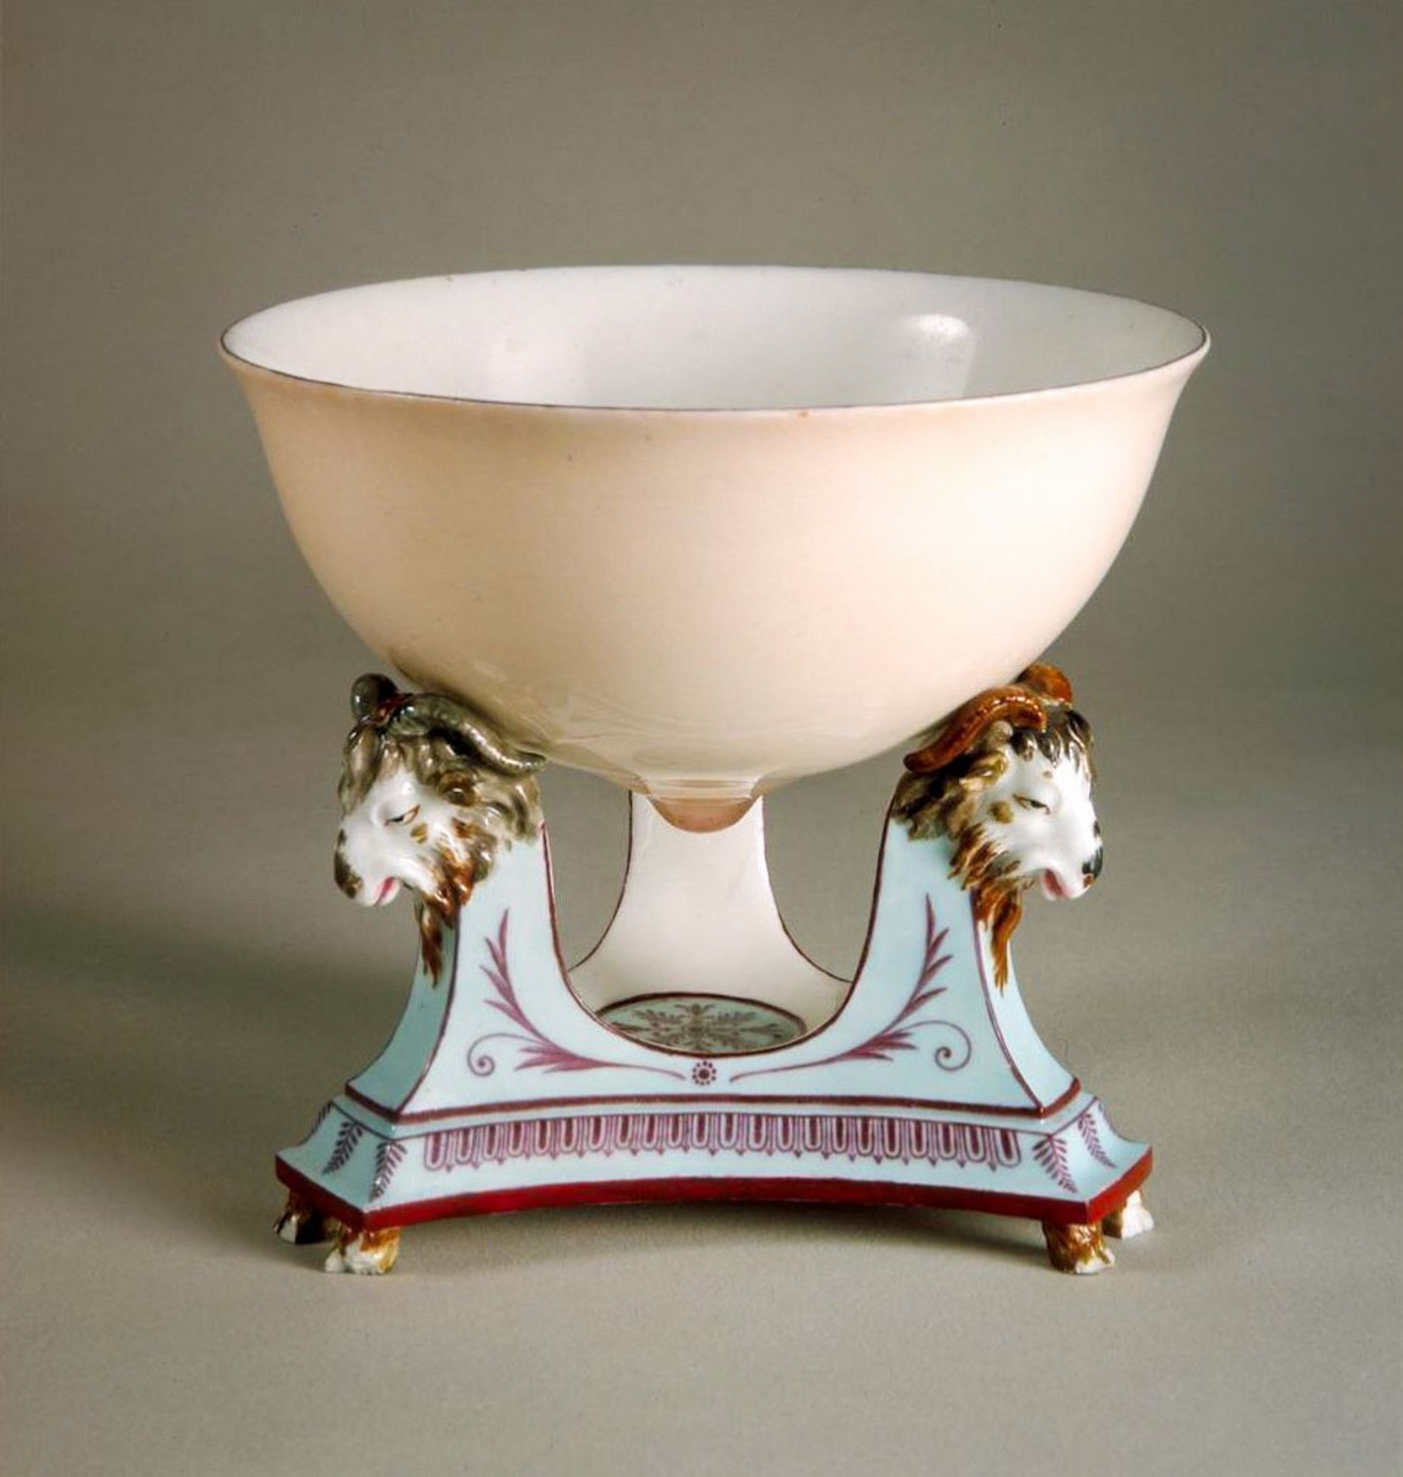 Delicate Sévres porcelain bowl, in the shape of a breast, supported by a porcelain tripod with painted and gilded goat heads. The bowl is a very pale shell pink, with the blushed nipple slightly darker. The tripod below the goats' heads is a pale blue, <br />with dark maroon decorative patterns (somewhat Greek looking). Pairs of little goats' hooves support each leg of the tripod. (Sèvres Porcelain Manufactory, 1788). Painted by Fumez, after a design by Jean-Jacques Lagrené and Louis-Simon Boizot. Photo: M. <br />Beck-Coppola (Musée National de la Céramique).